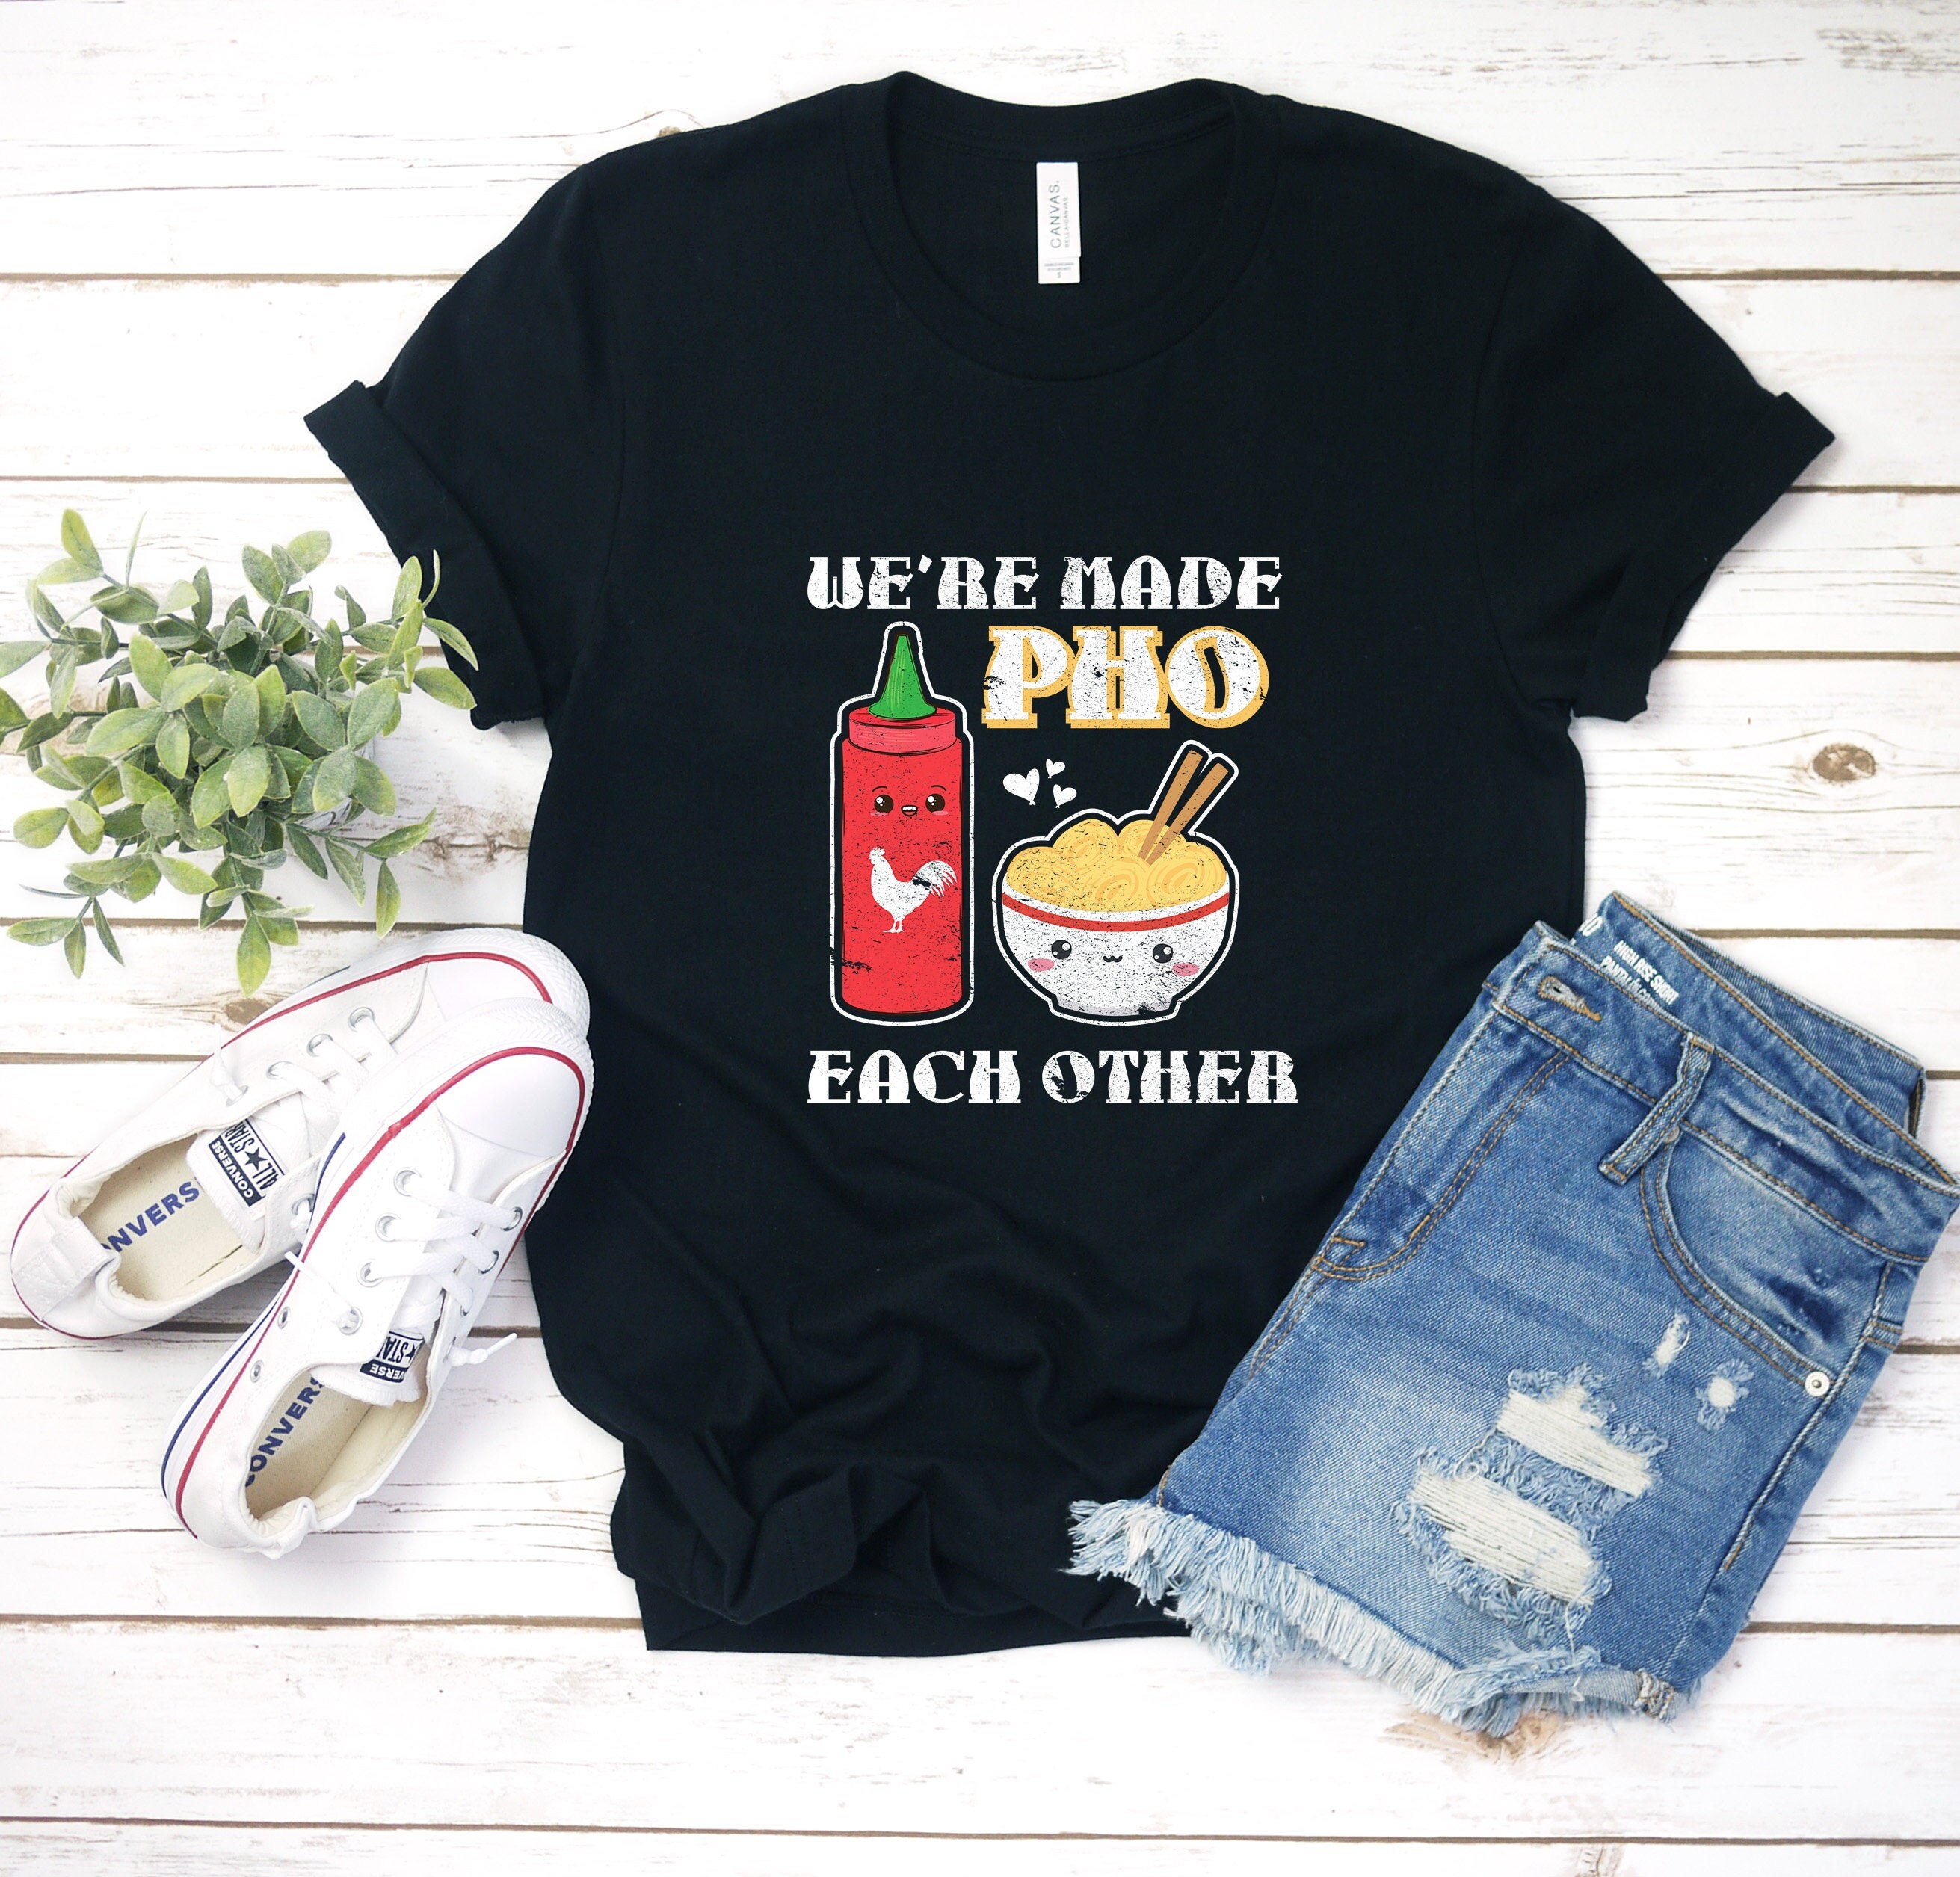 Made Pho Each Other Shirt Funny Lover T-Shirt Vietnamese Food Shirts Cute Asian Noodles Soup Tshirt Gift Noodle Bowl Foodie Viet Tee Cuisine